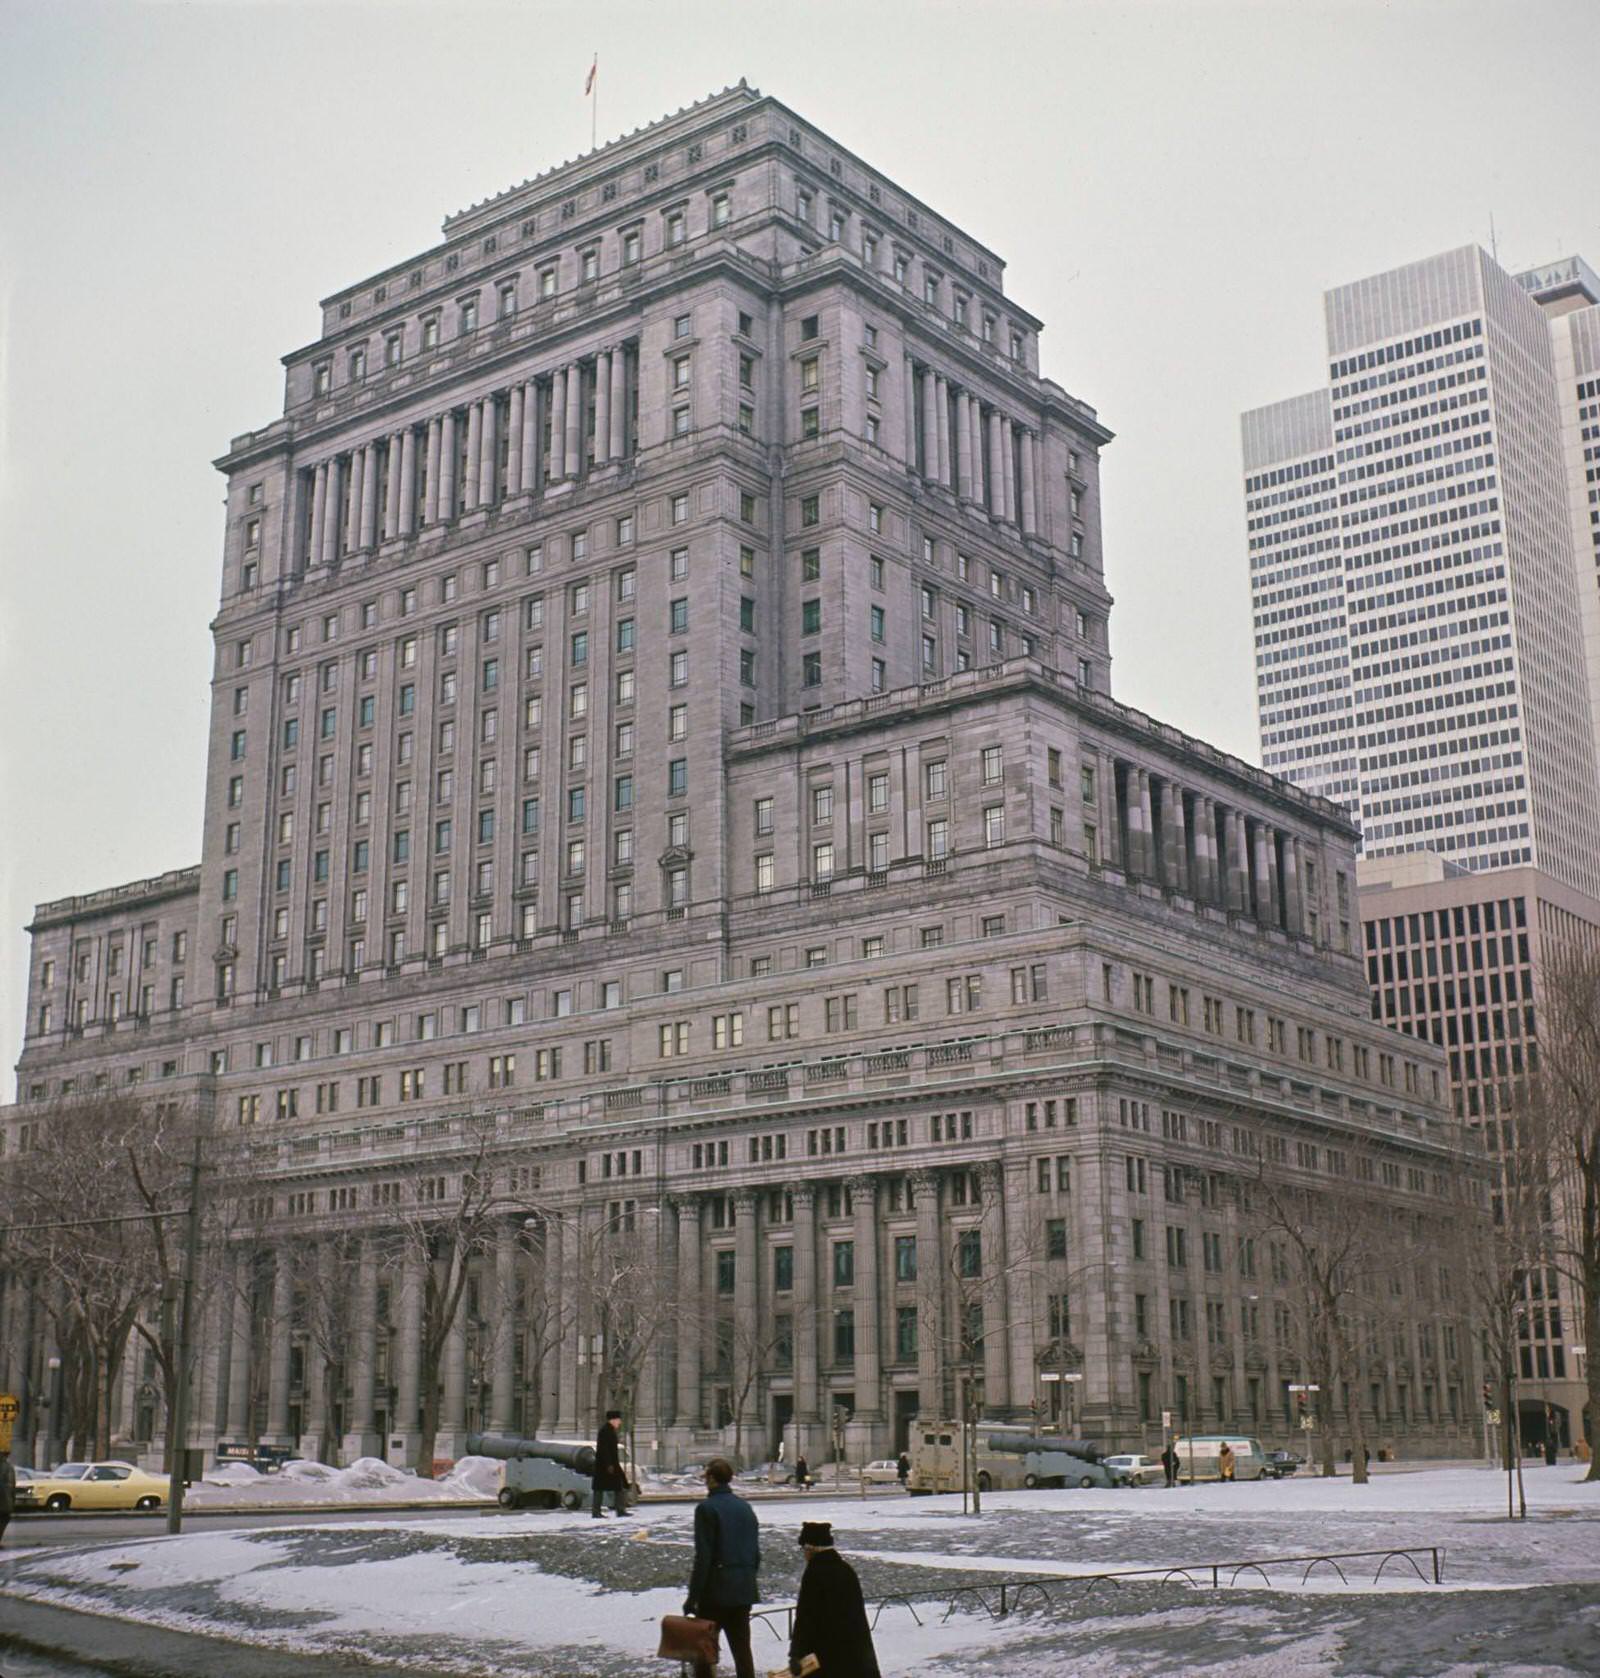 Pedestrians cross a snow covered Dominion Square (now Dorchester Square) in front of the Sun Life Building on the corner of Rene Levesque Boulevard West in the downtown centre of the city of Montreal, 1965